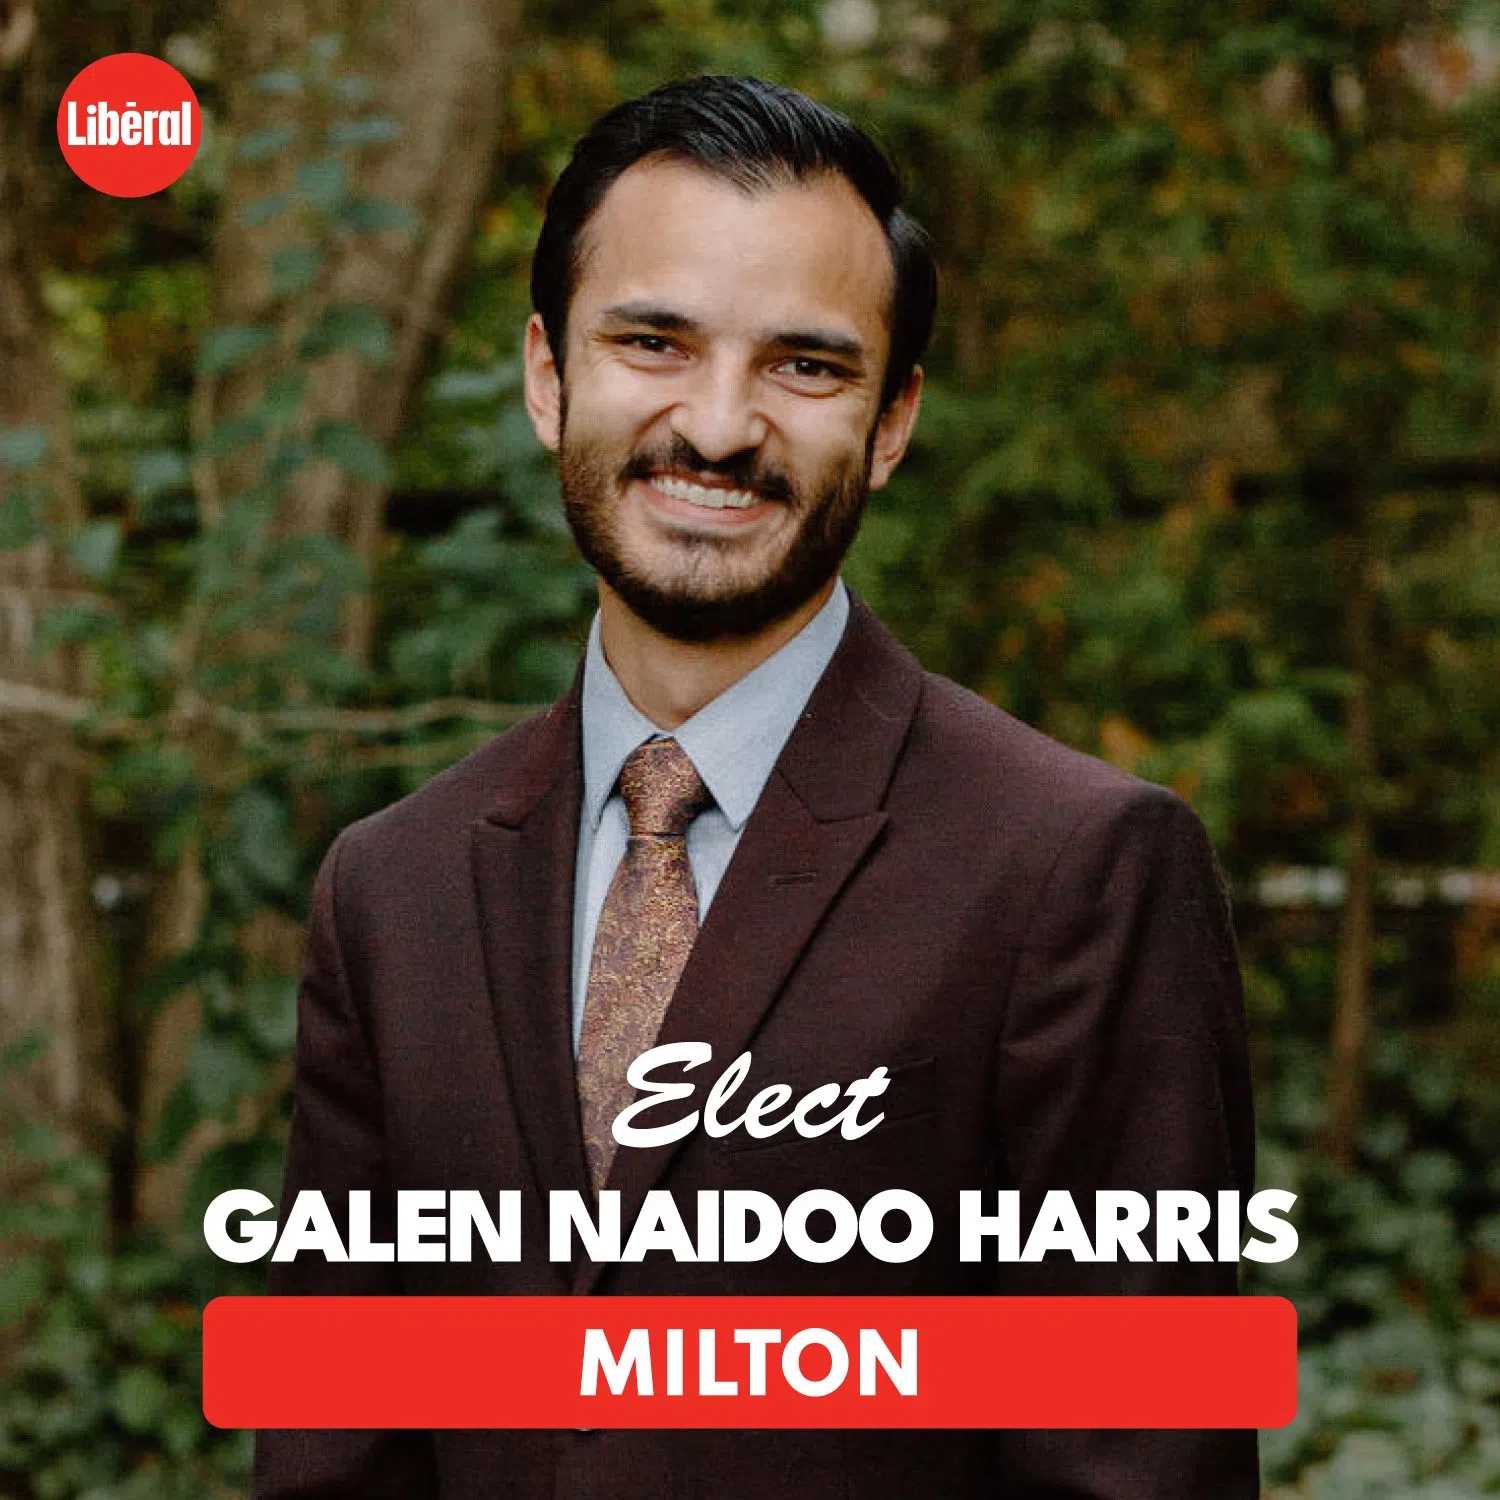 Ontario Liberal Party announces Milton candidate for upcoming by-election